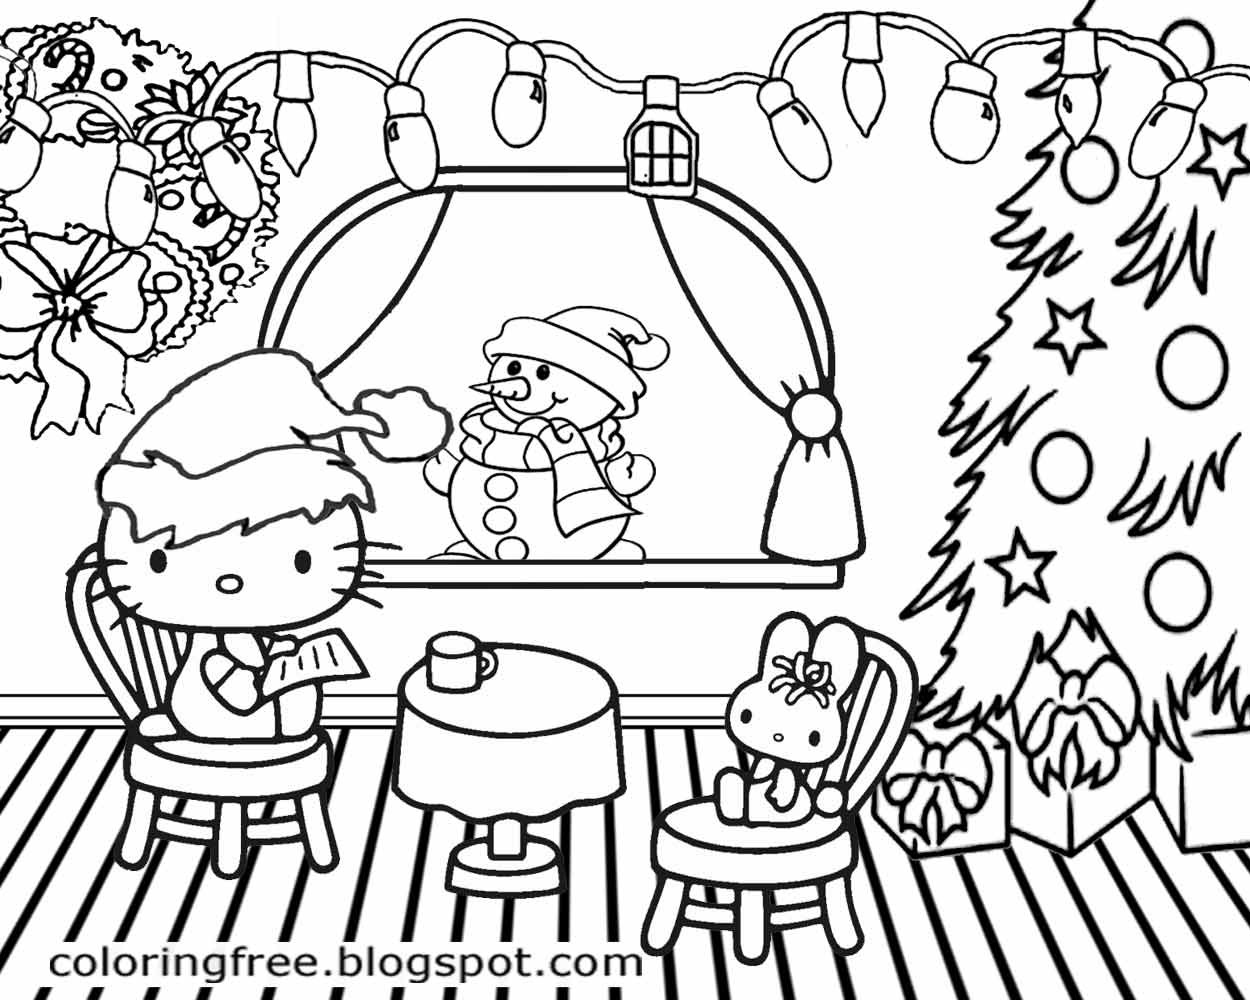 Best ideas about Simple Coloring Pages For Teens
. Save or Pin Free Coloring Pages Printable To Color Kids Now.